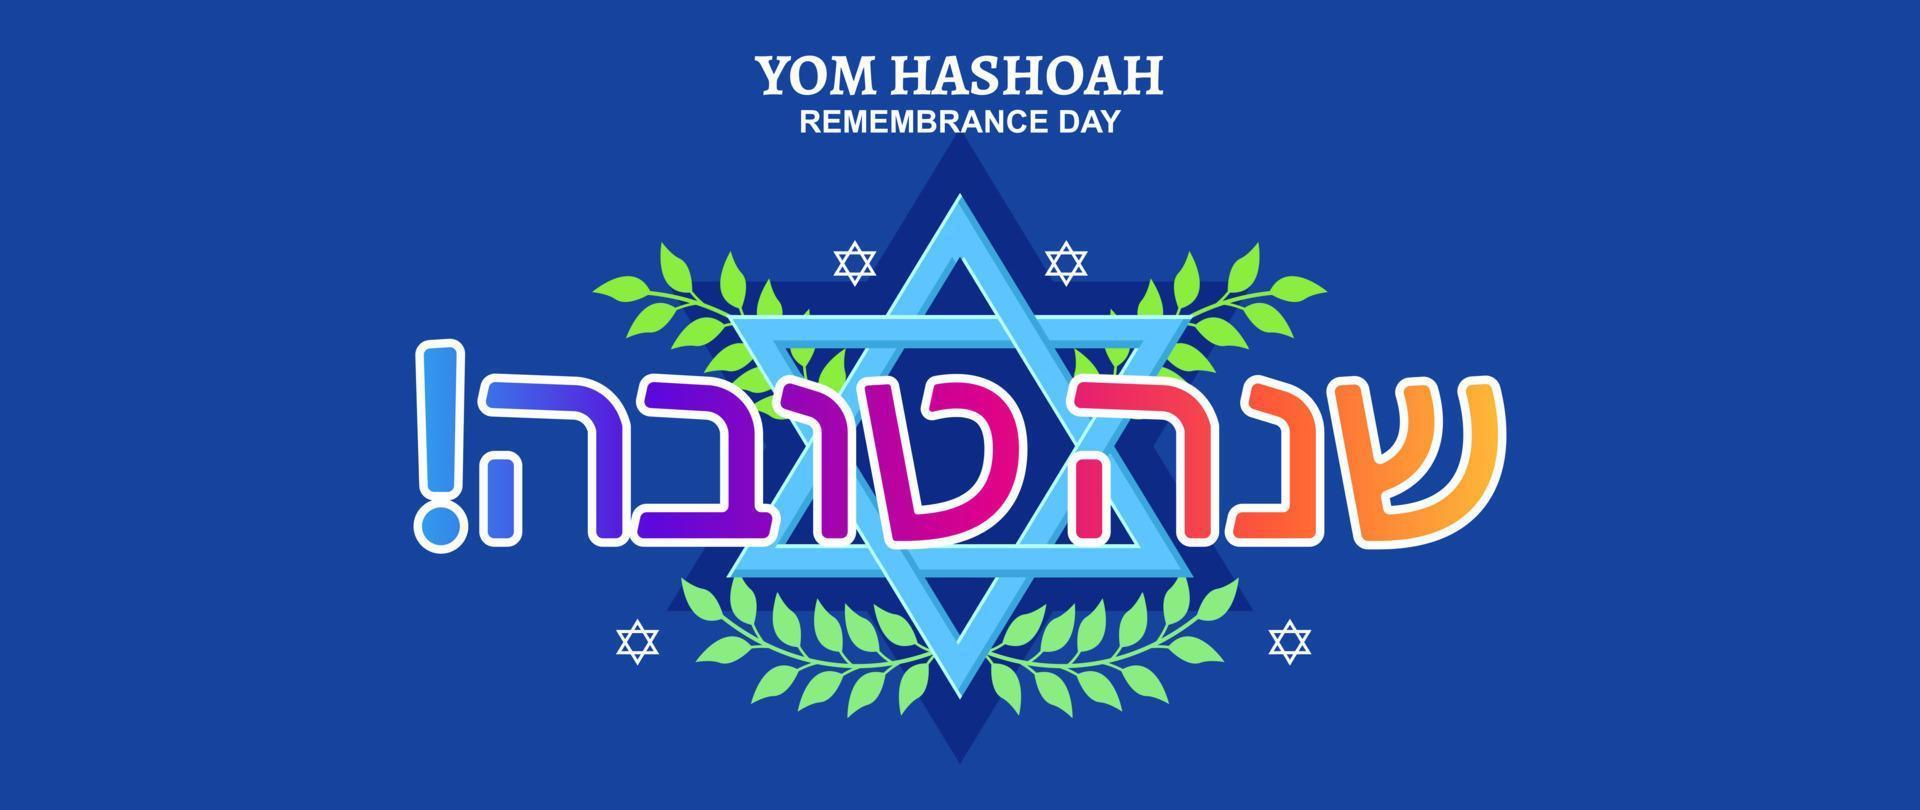 Yom hashoah remembrance day lettering banner illustration vector